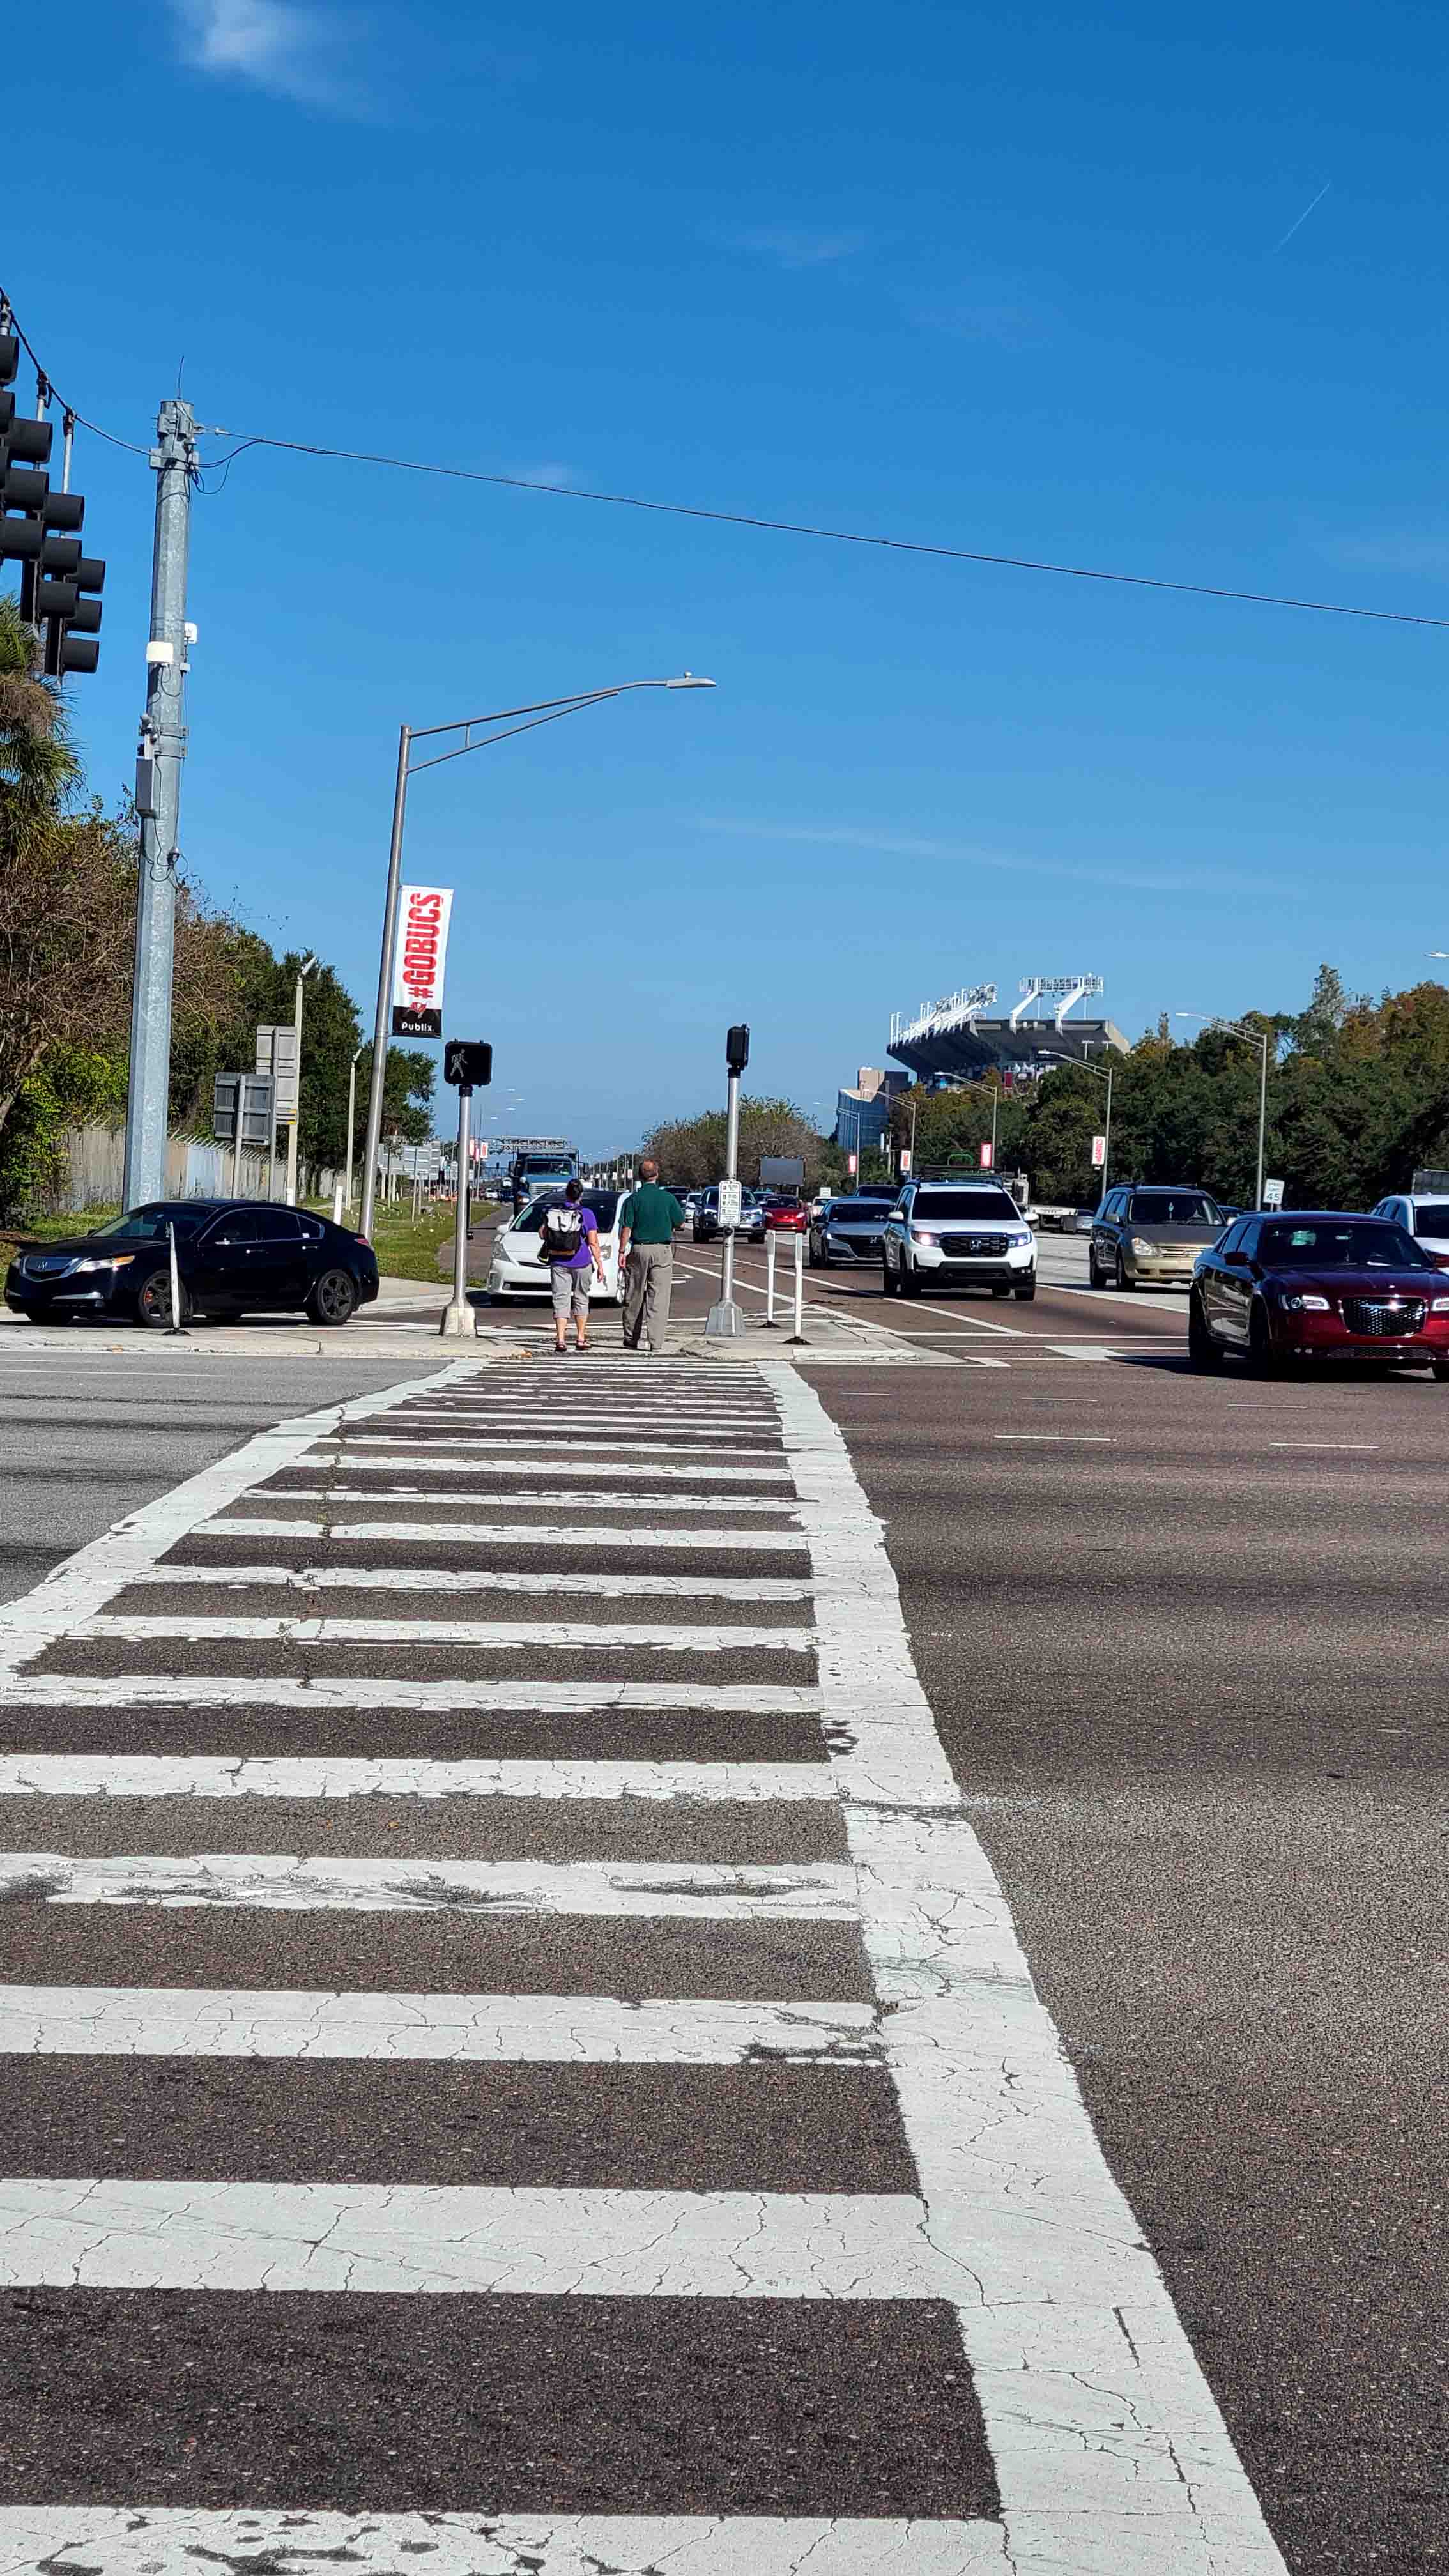 Image show a zebra-painted crosswalk crossing 9 lanes of traffic to reach and go through (at street-level) an island separating a right-turning lane.